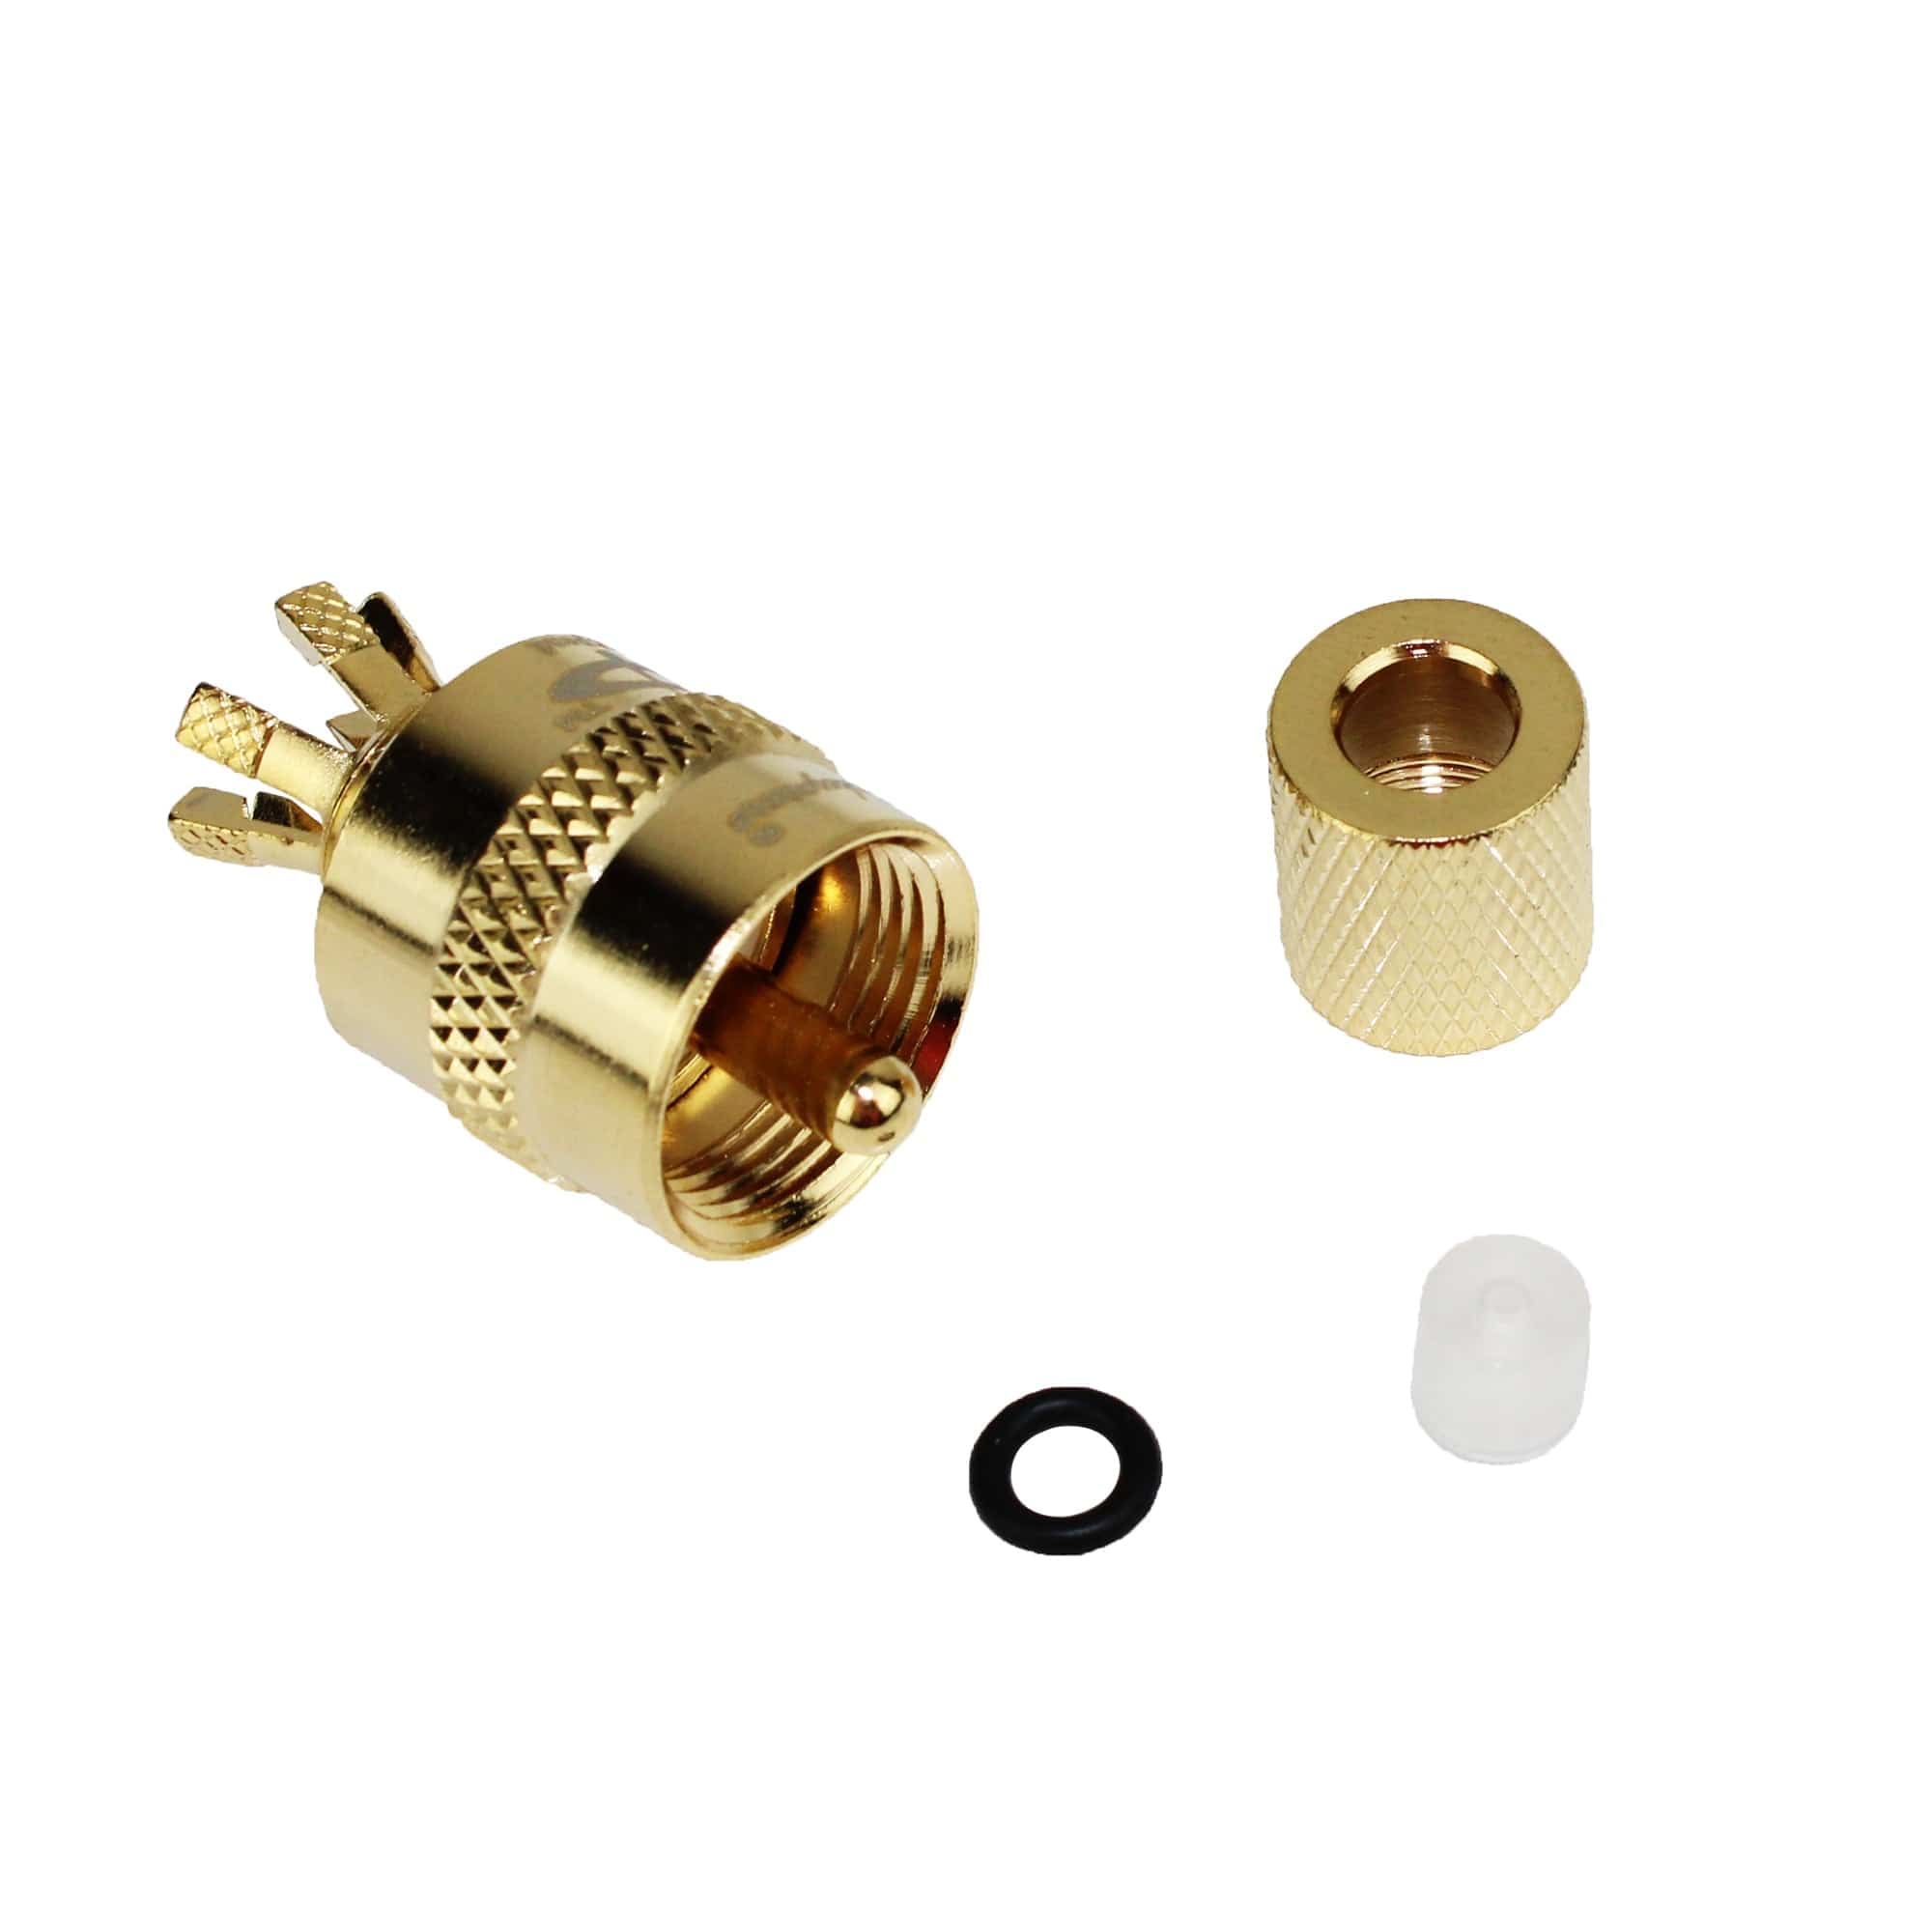 Shakespeare PL-259-CP-G Centerpin Gold-Plated Connector